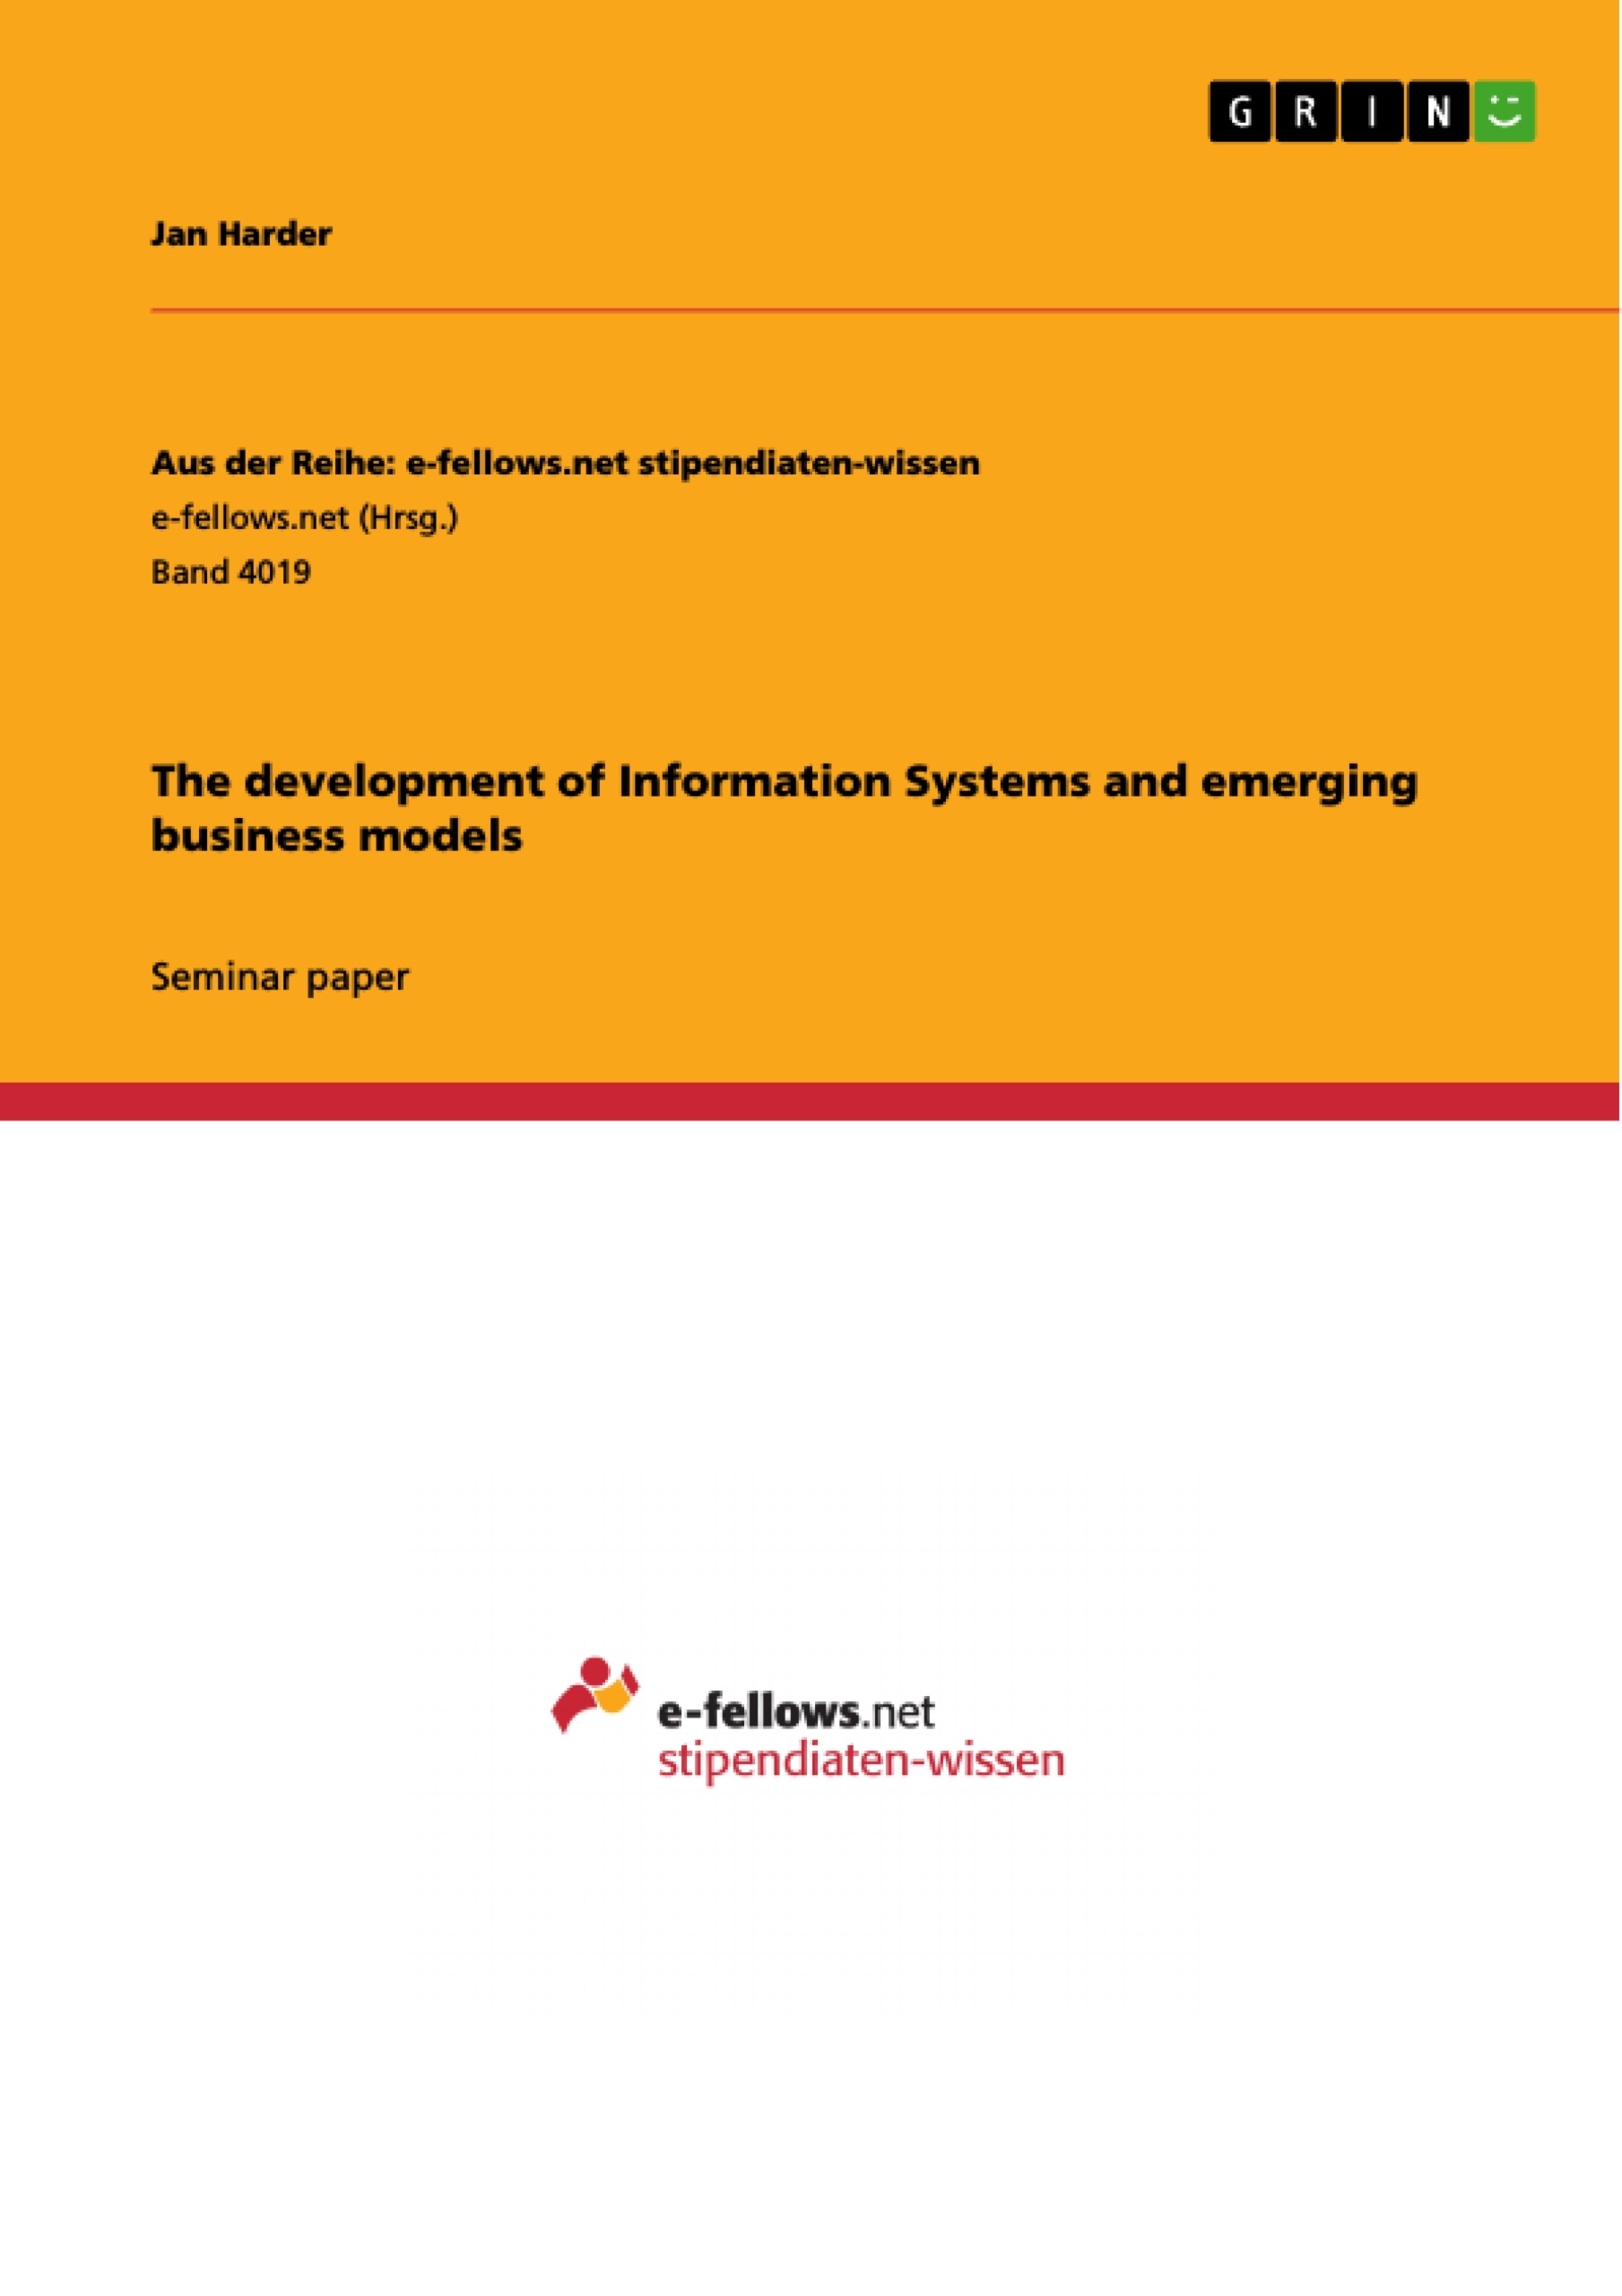 Title: The development of Information Systems and emerging business models